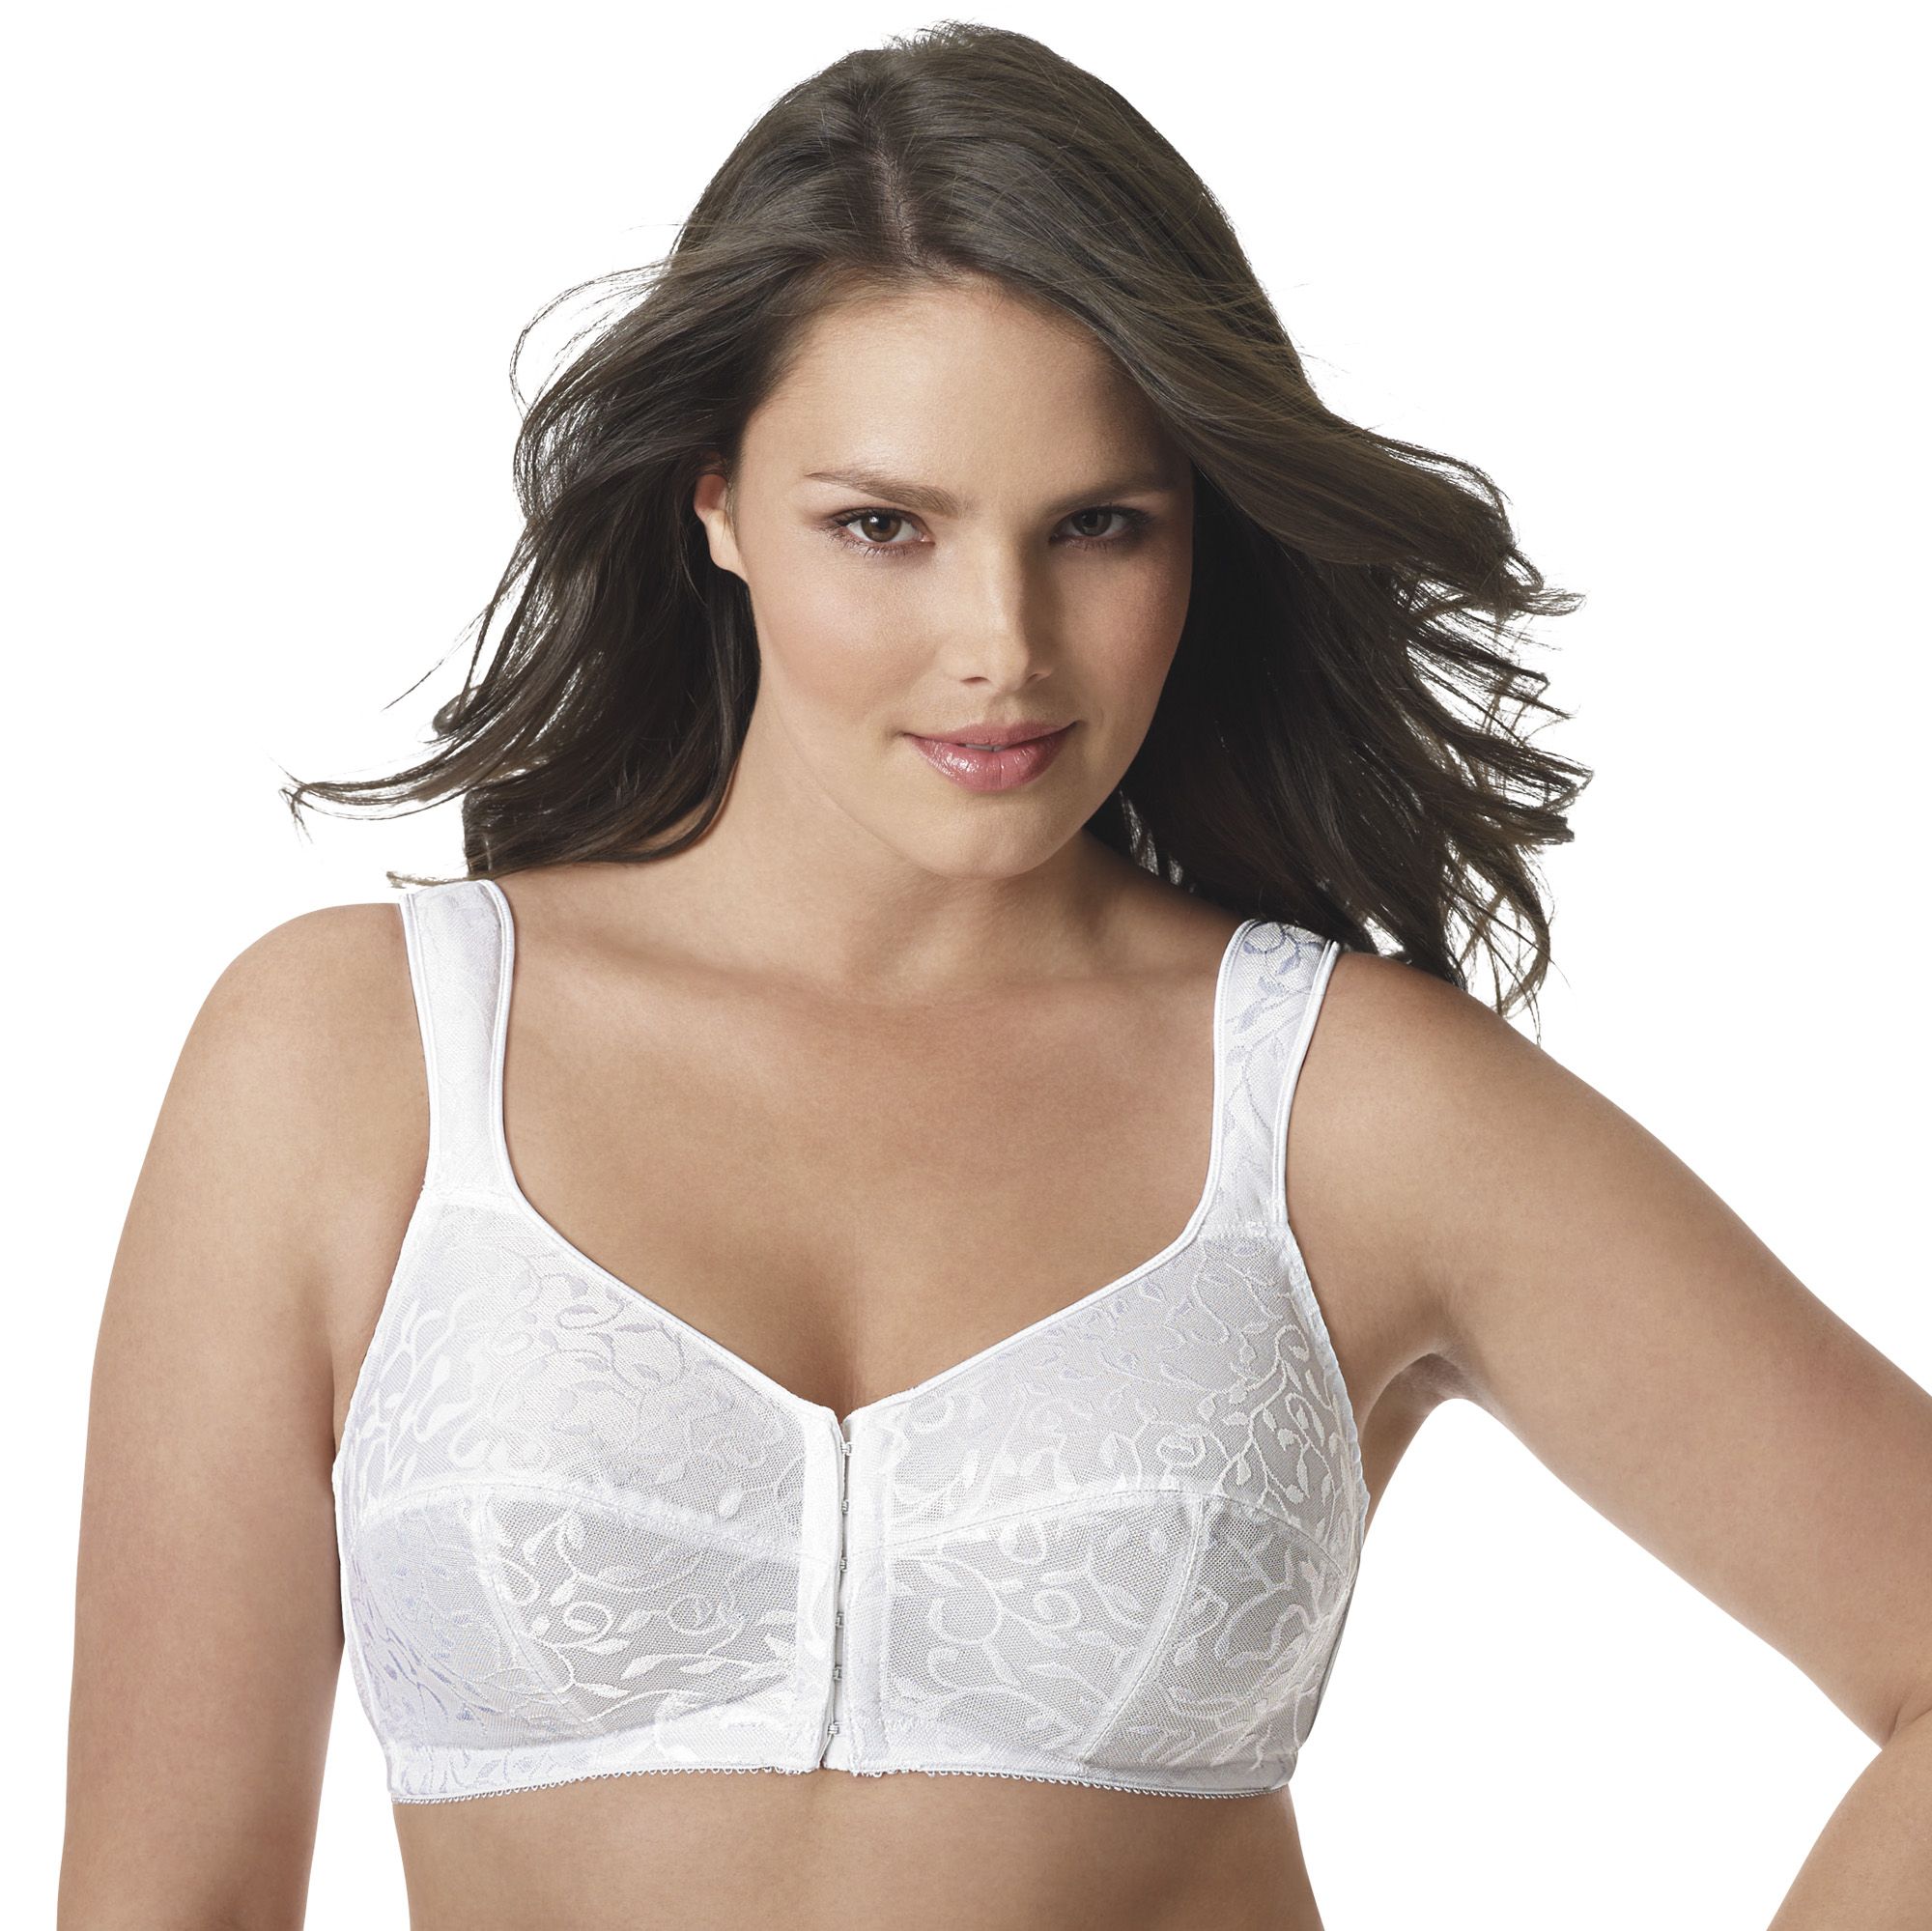 Just My Size Women's Easy-On Front Close Wirefree Bra, Style 1107